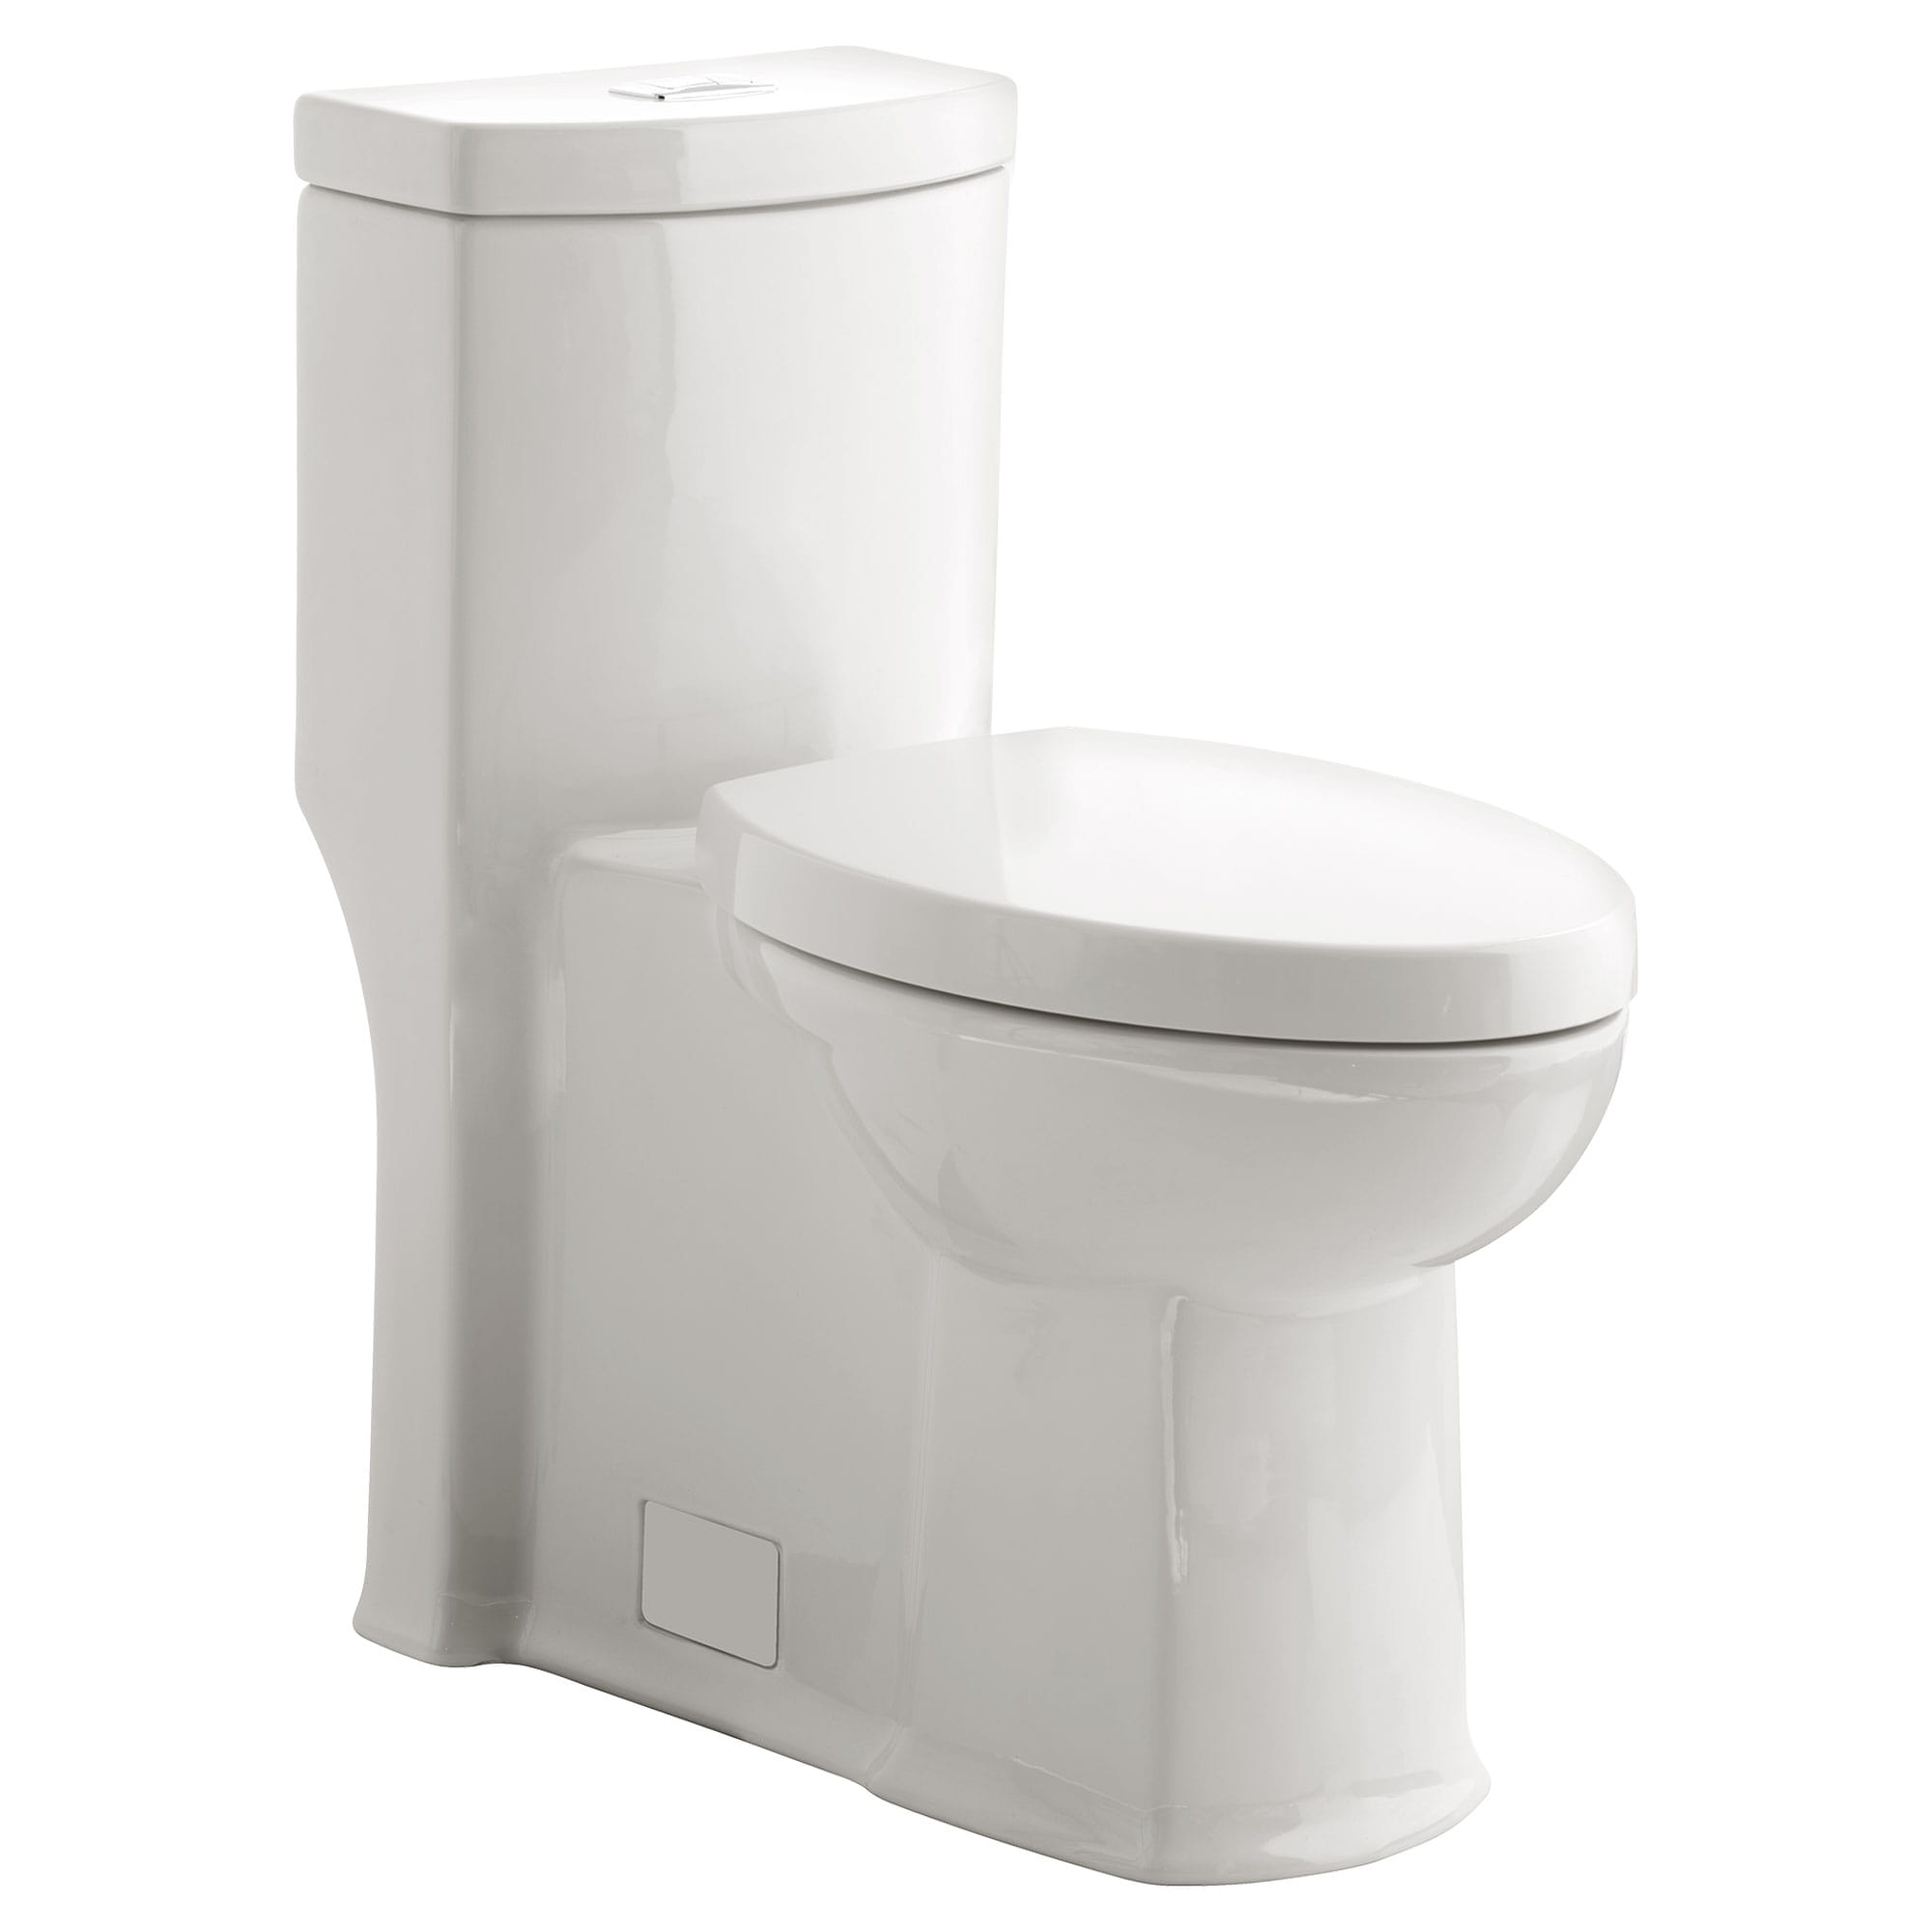 Boulevard® One-Piece Dual Flush 1.6 gpf/6.0 Lpf and 1.1 gpf/4.2 Lpf Chair Height Elongated Toilet With Seat